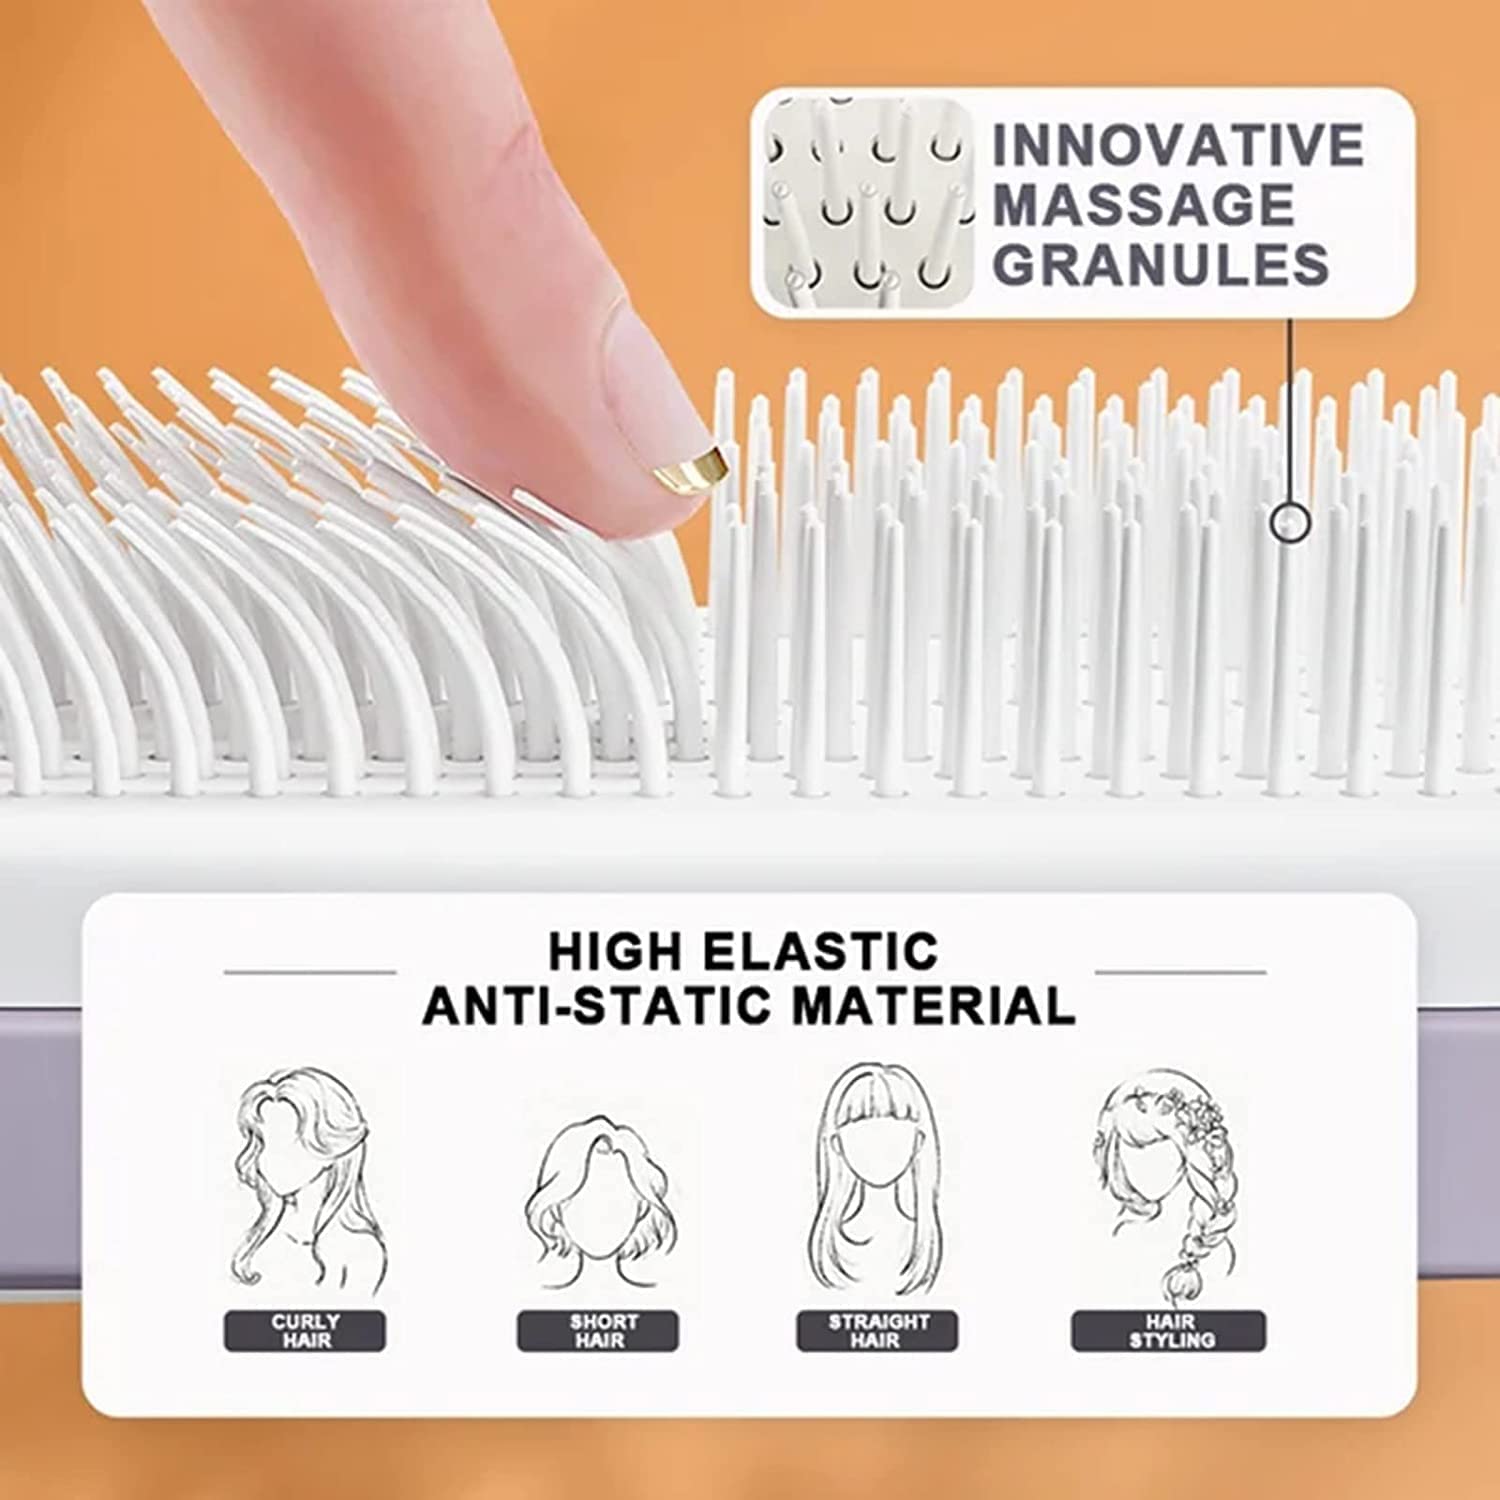 Self-cleaning Anti-static Massage Comb - Home Essentials Store